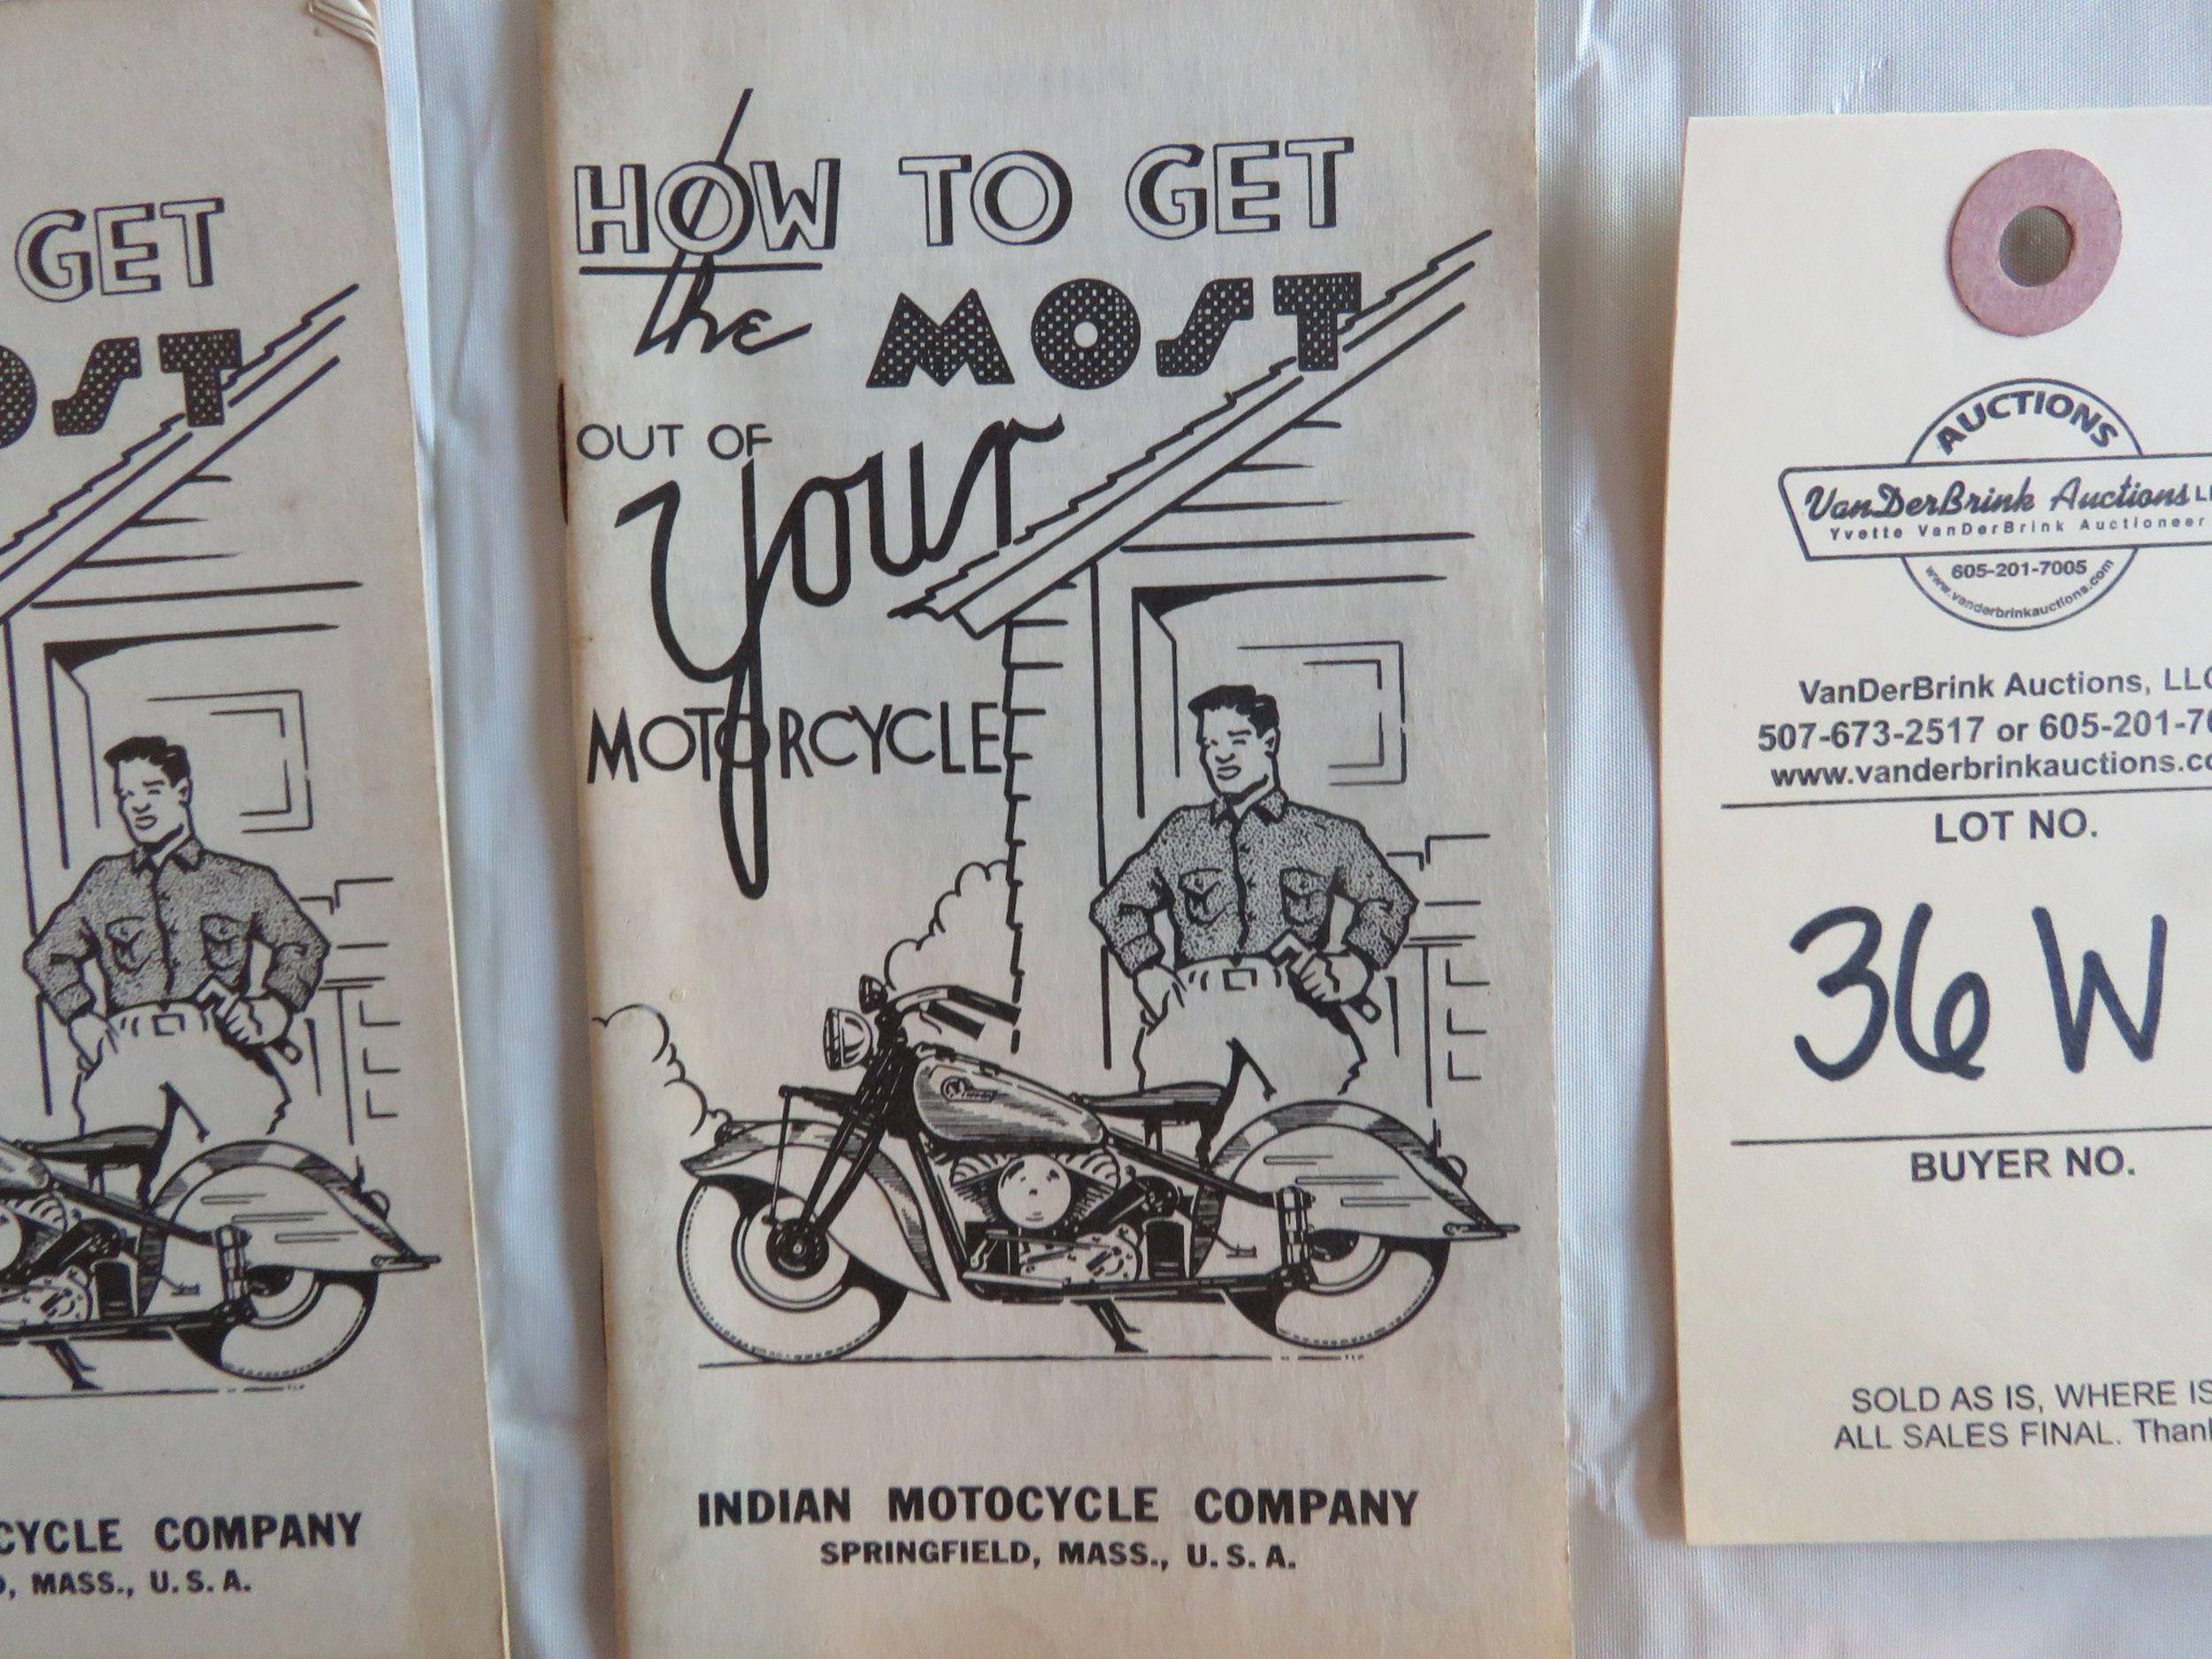 Lot of 2- "How to Get The Most Out of Your Motorcycle" Indian Motorcycle Pamphlets